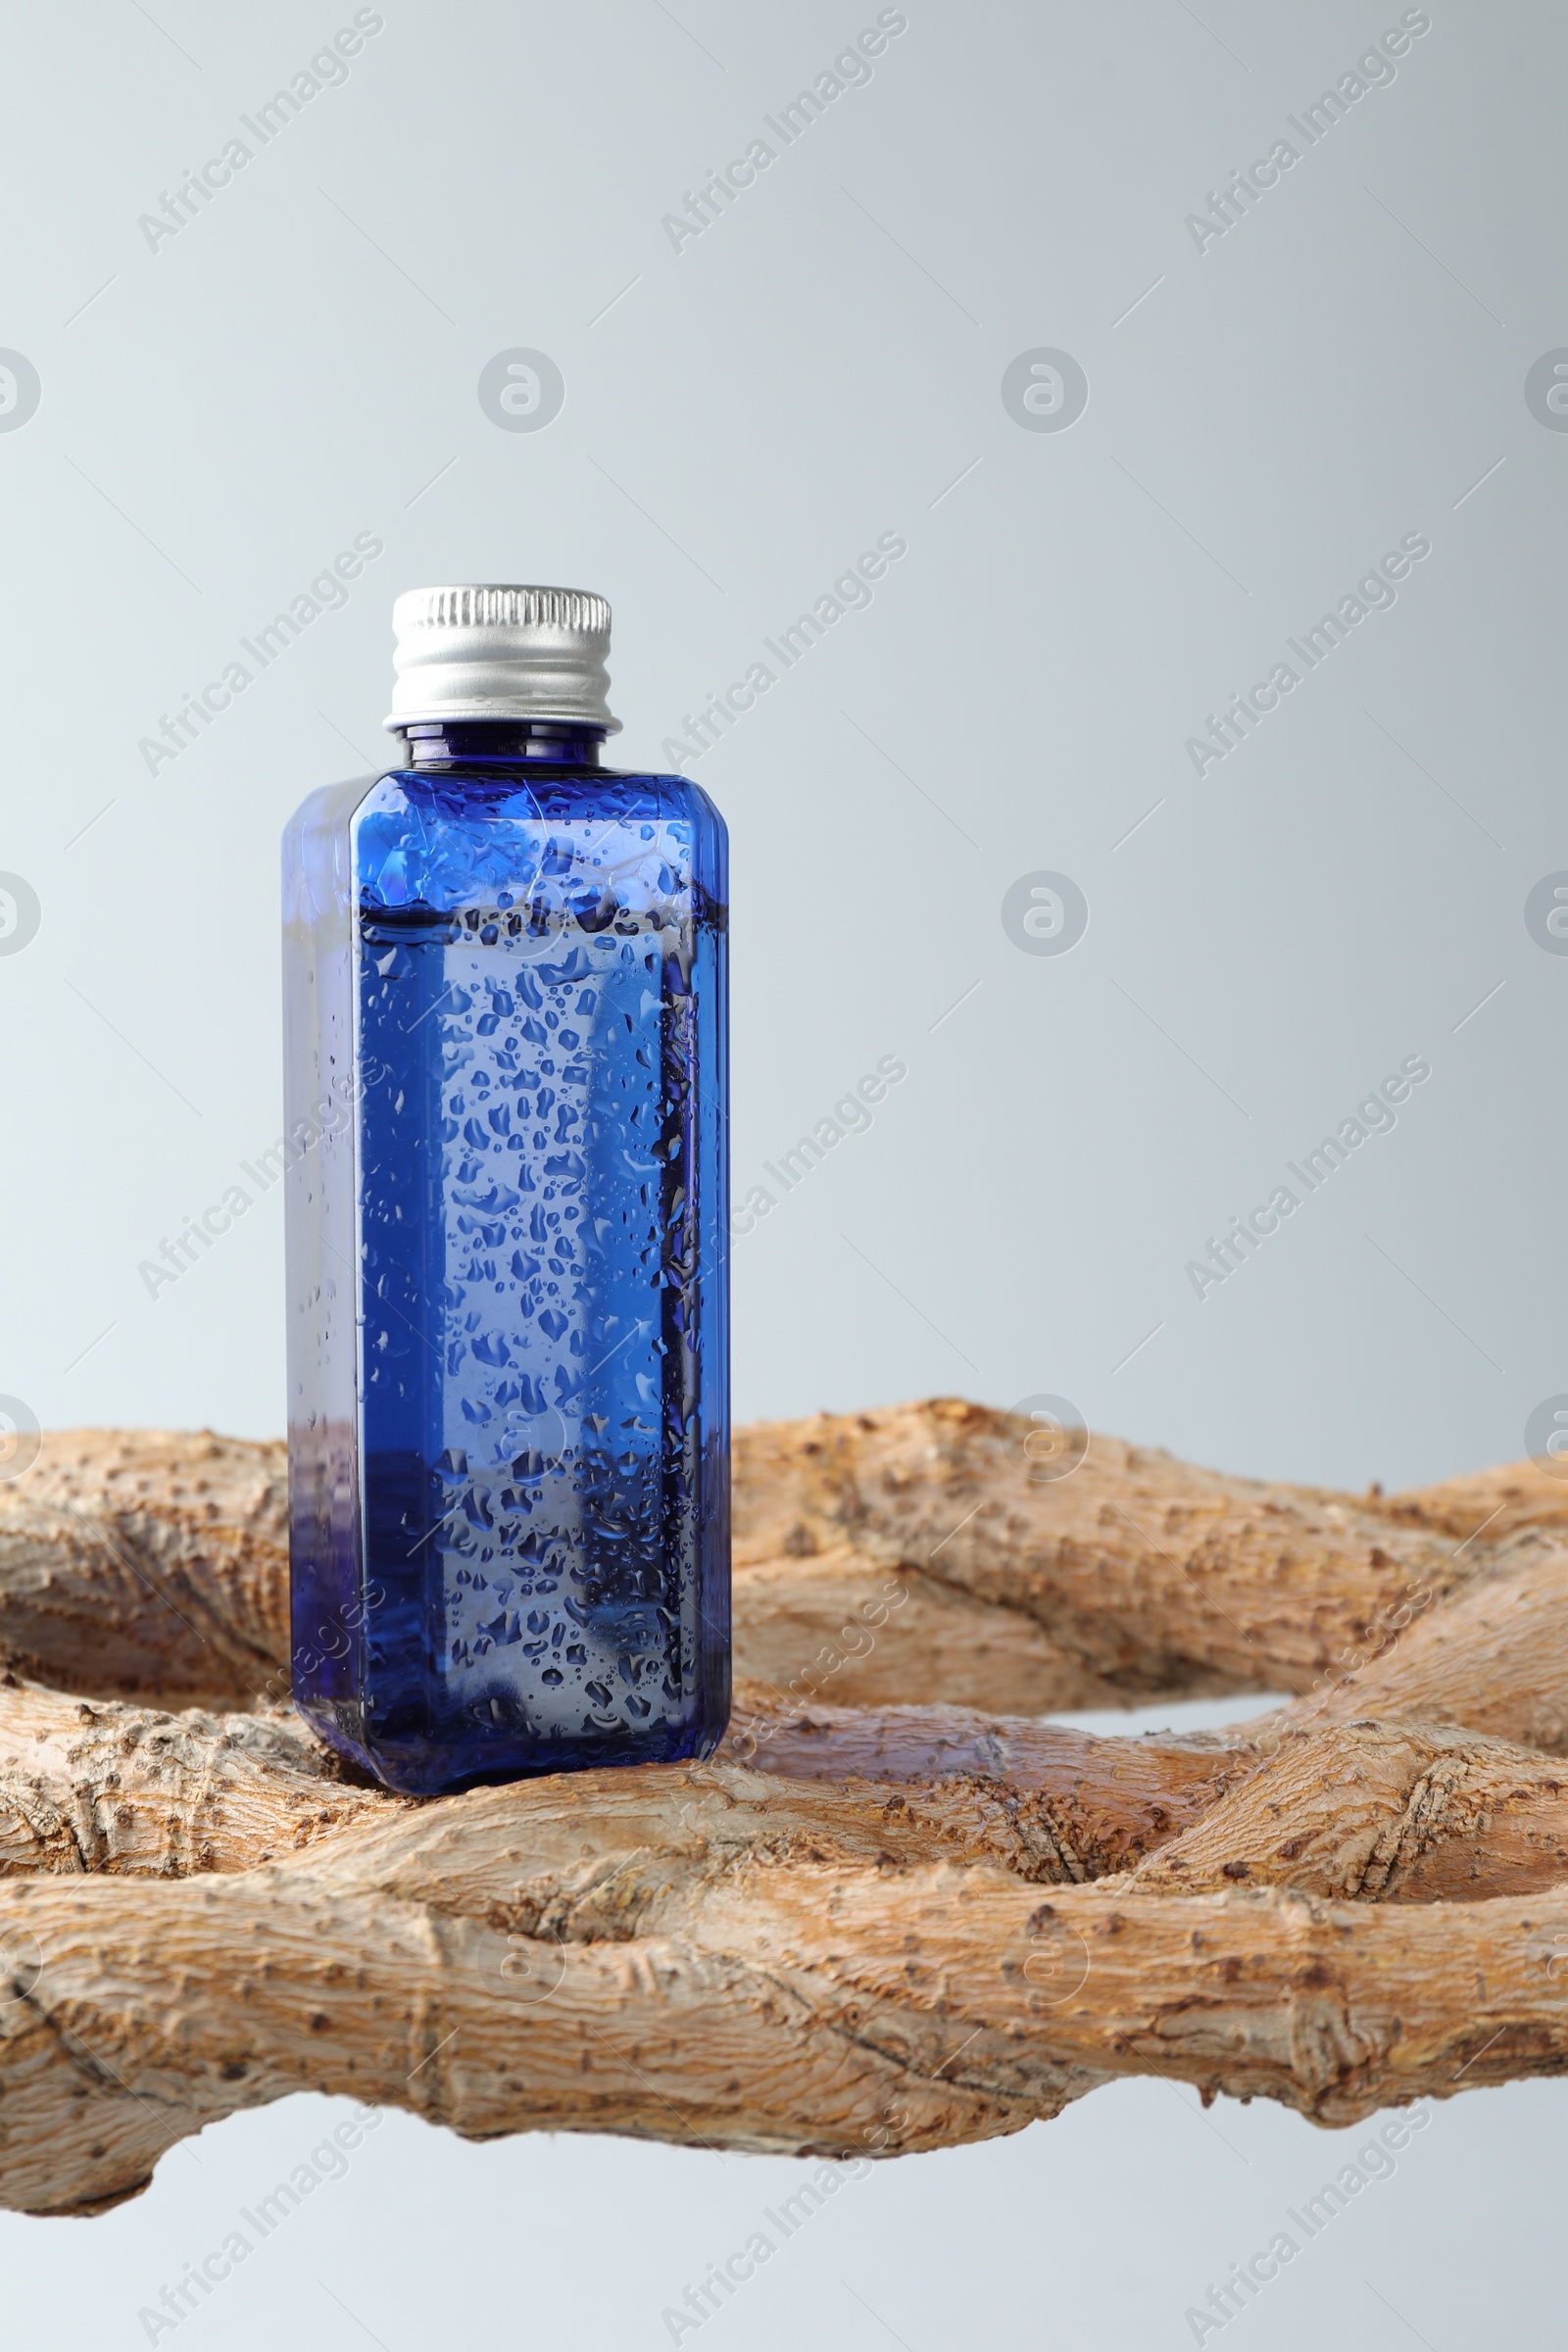 Photo of Bottle of cosmetic product on wooden branch against light grey background, space for text